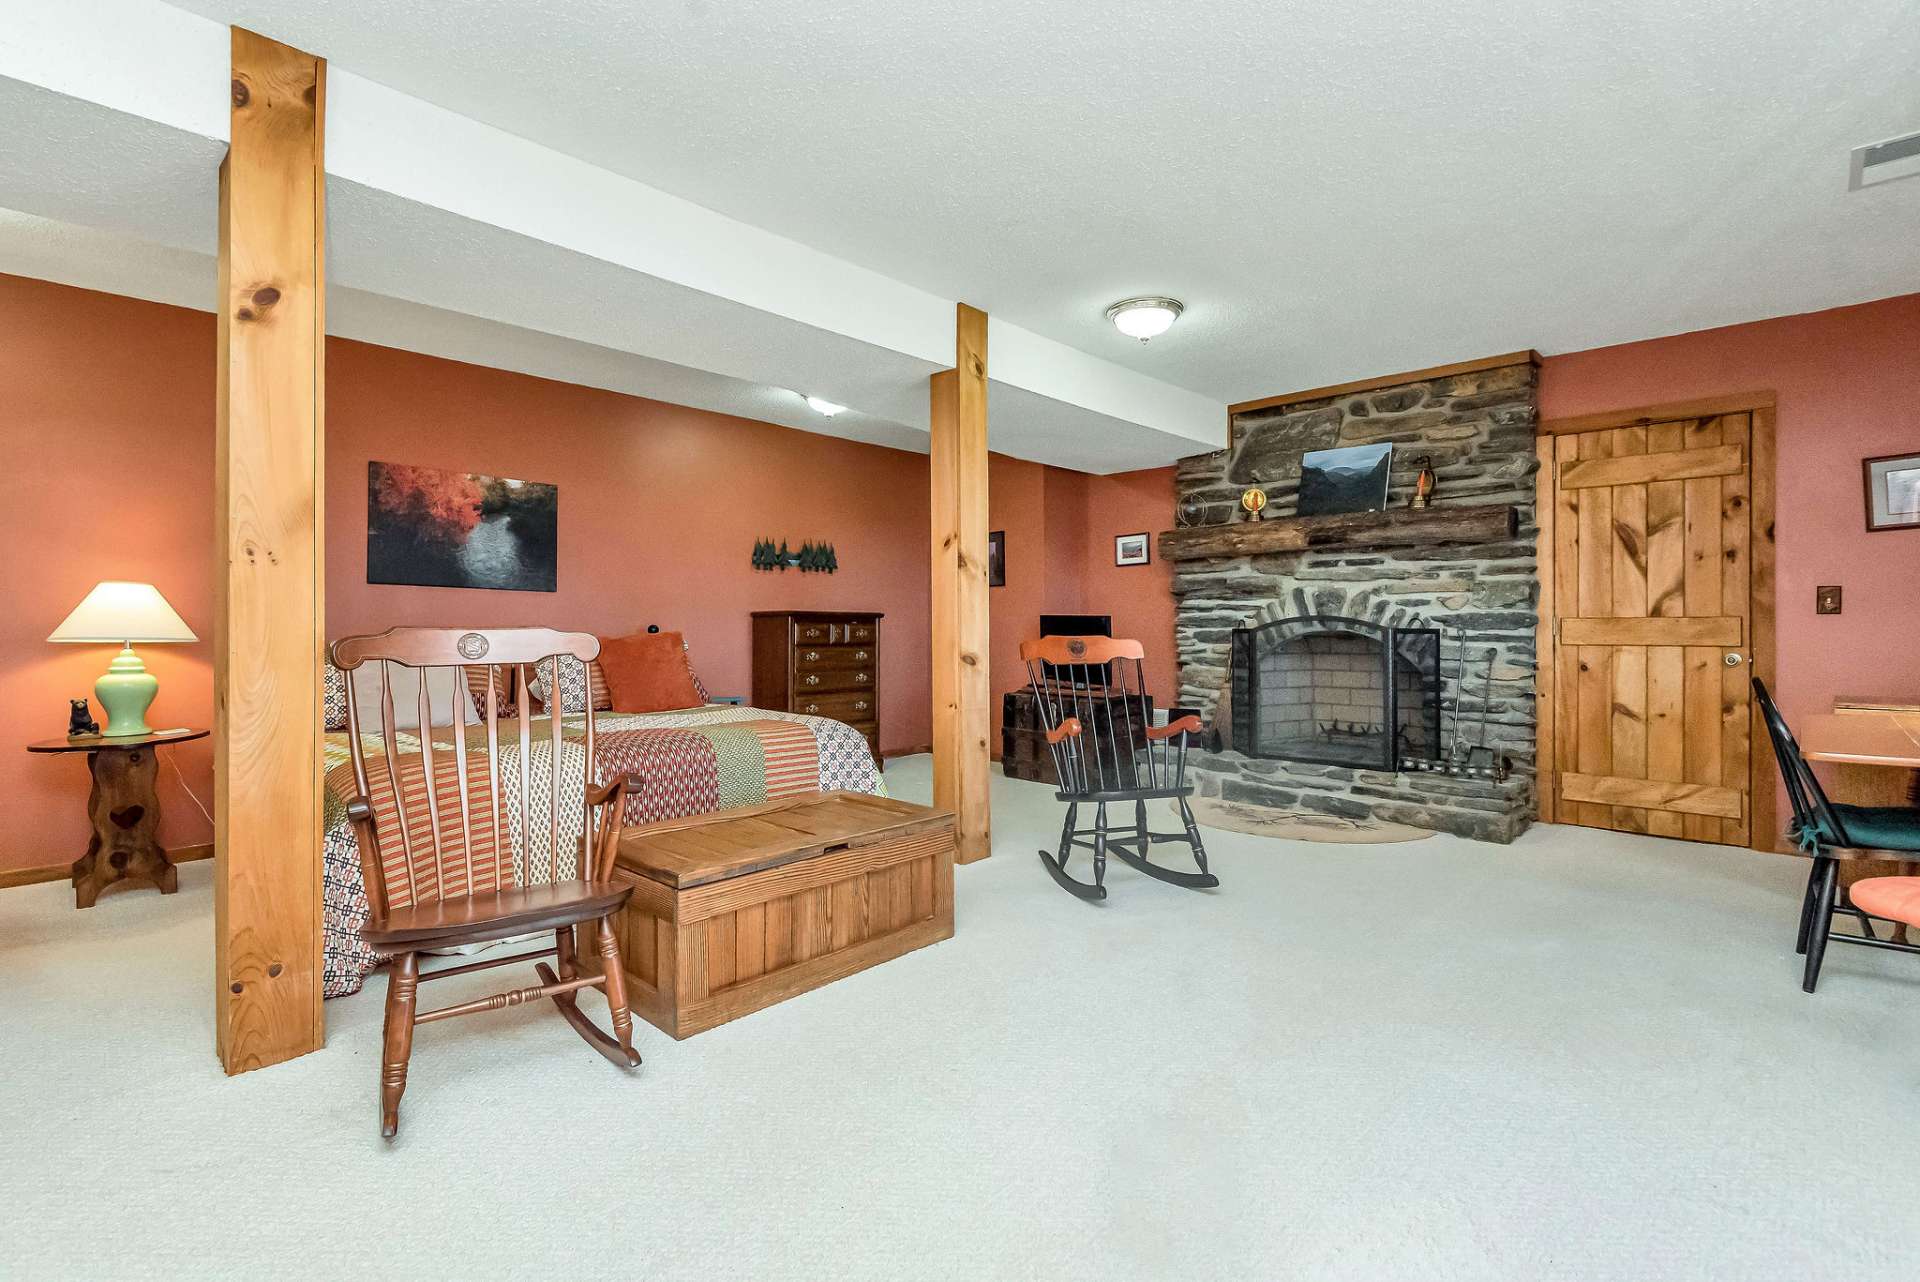 The family room welcomes you with a second stone fireplace.